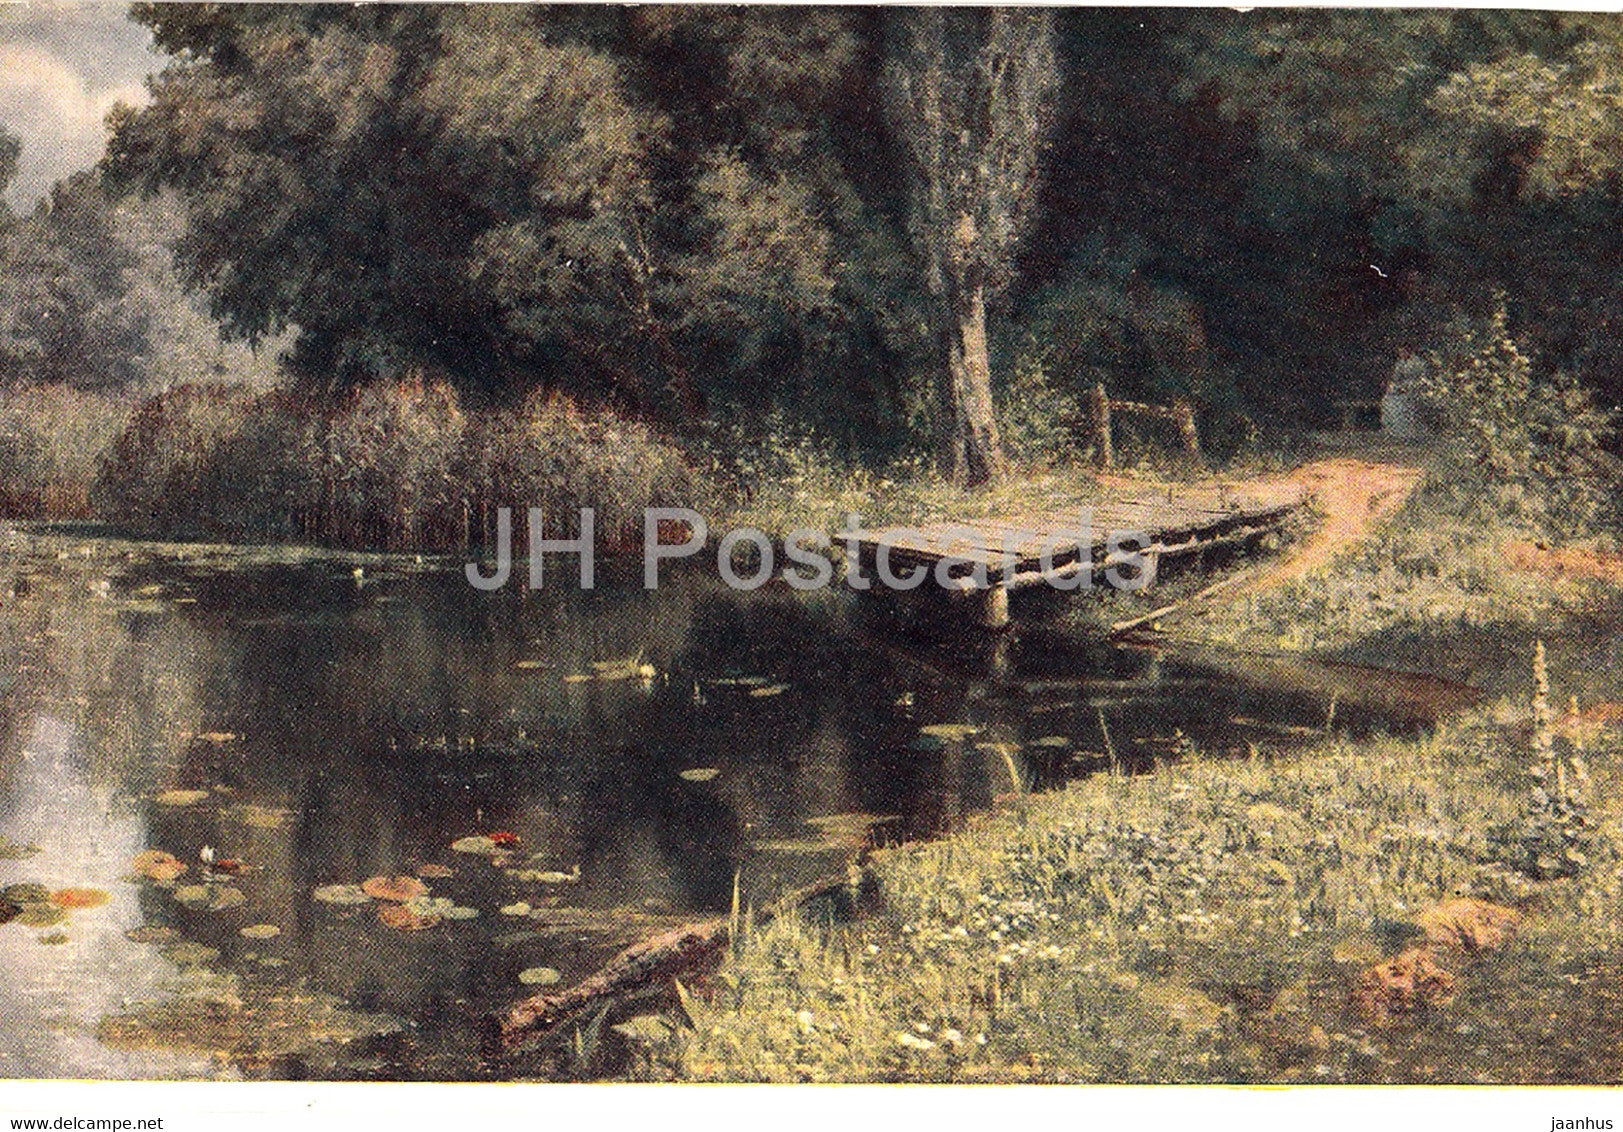 painting by V. Polenov - Overgrown pond - Russian art - 1952 - Russia USSR - unused - JH Postcards